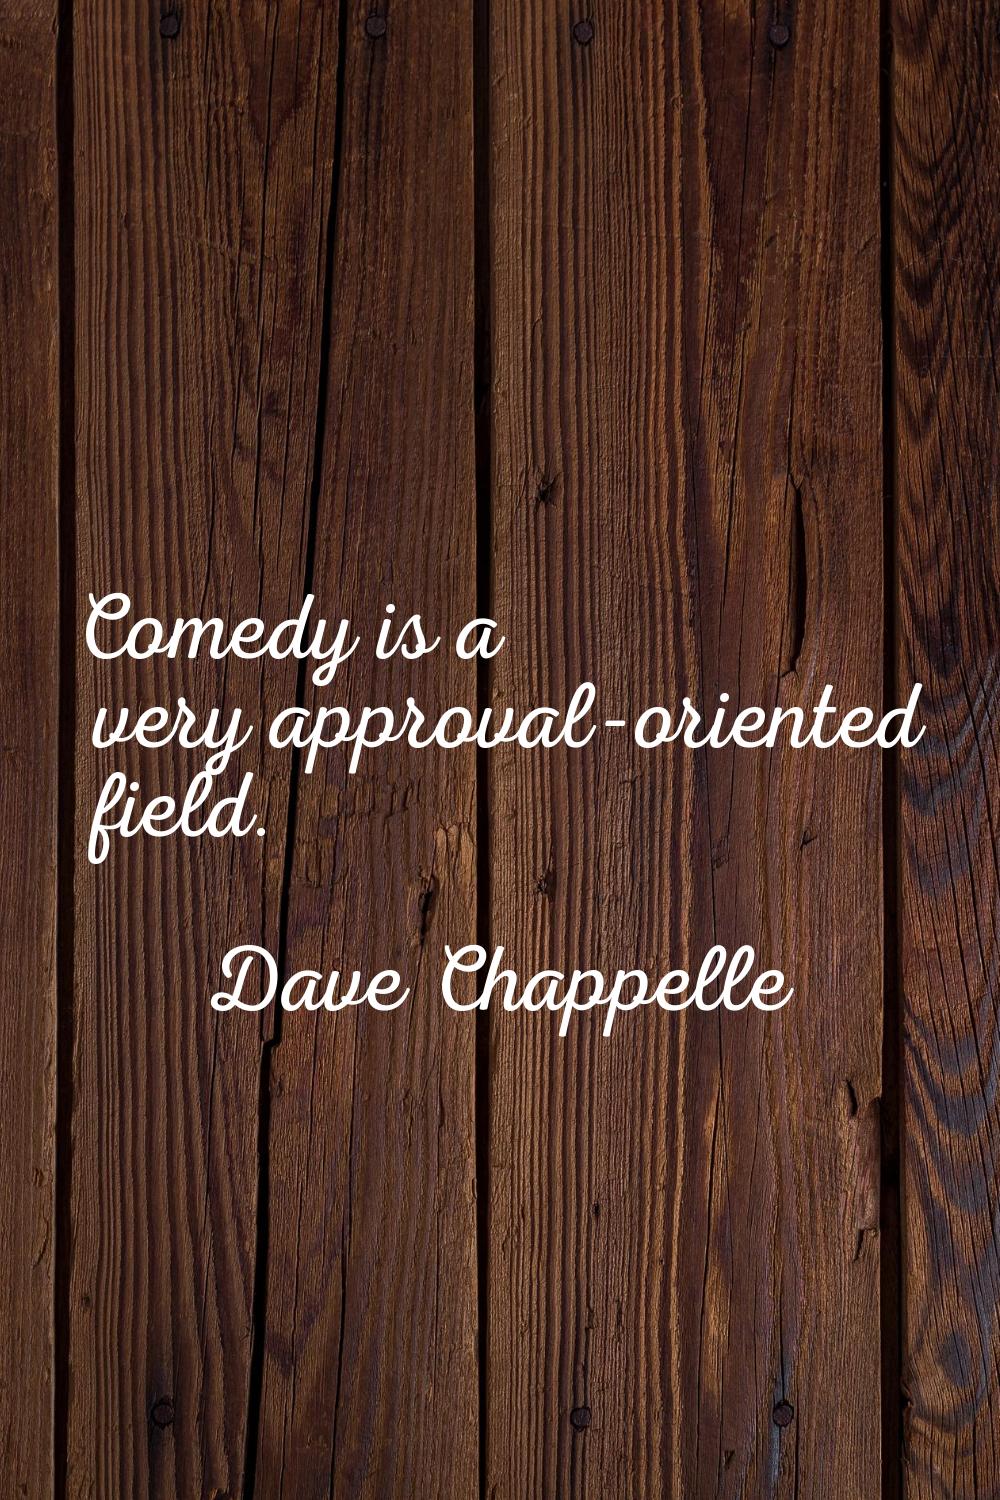 Comedy is a very approval-oriented field.